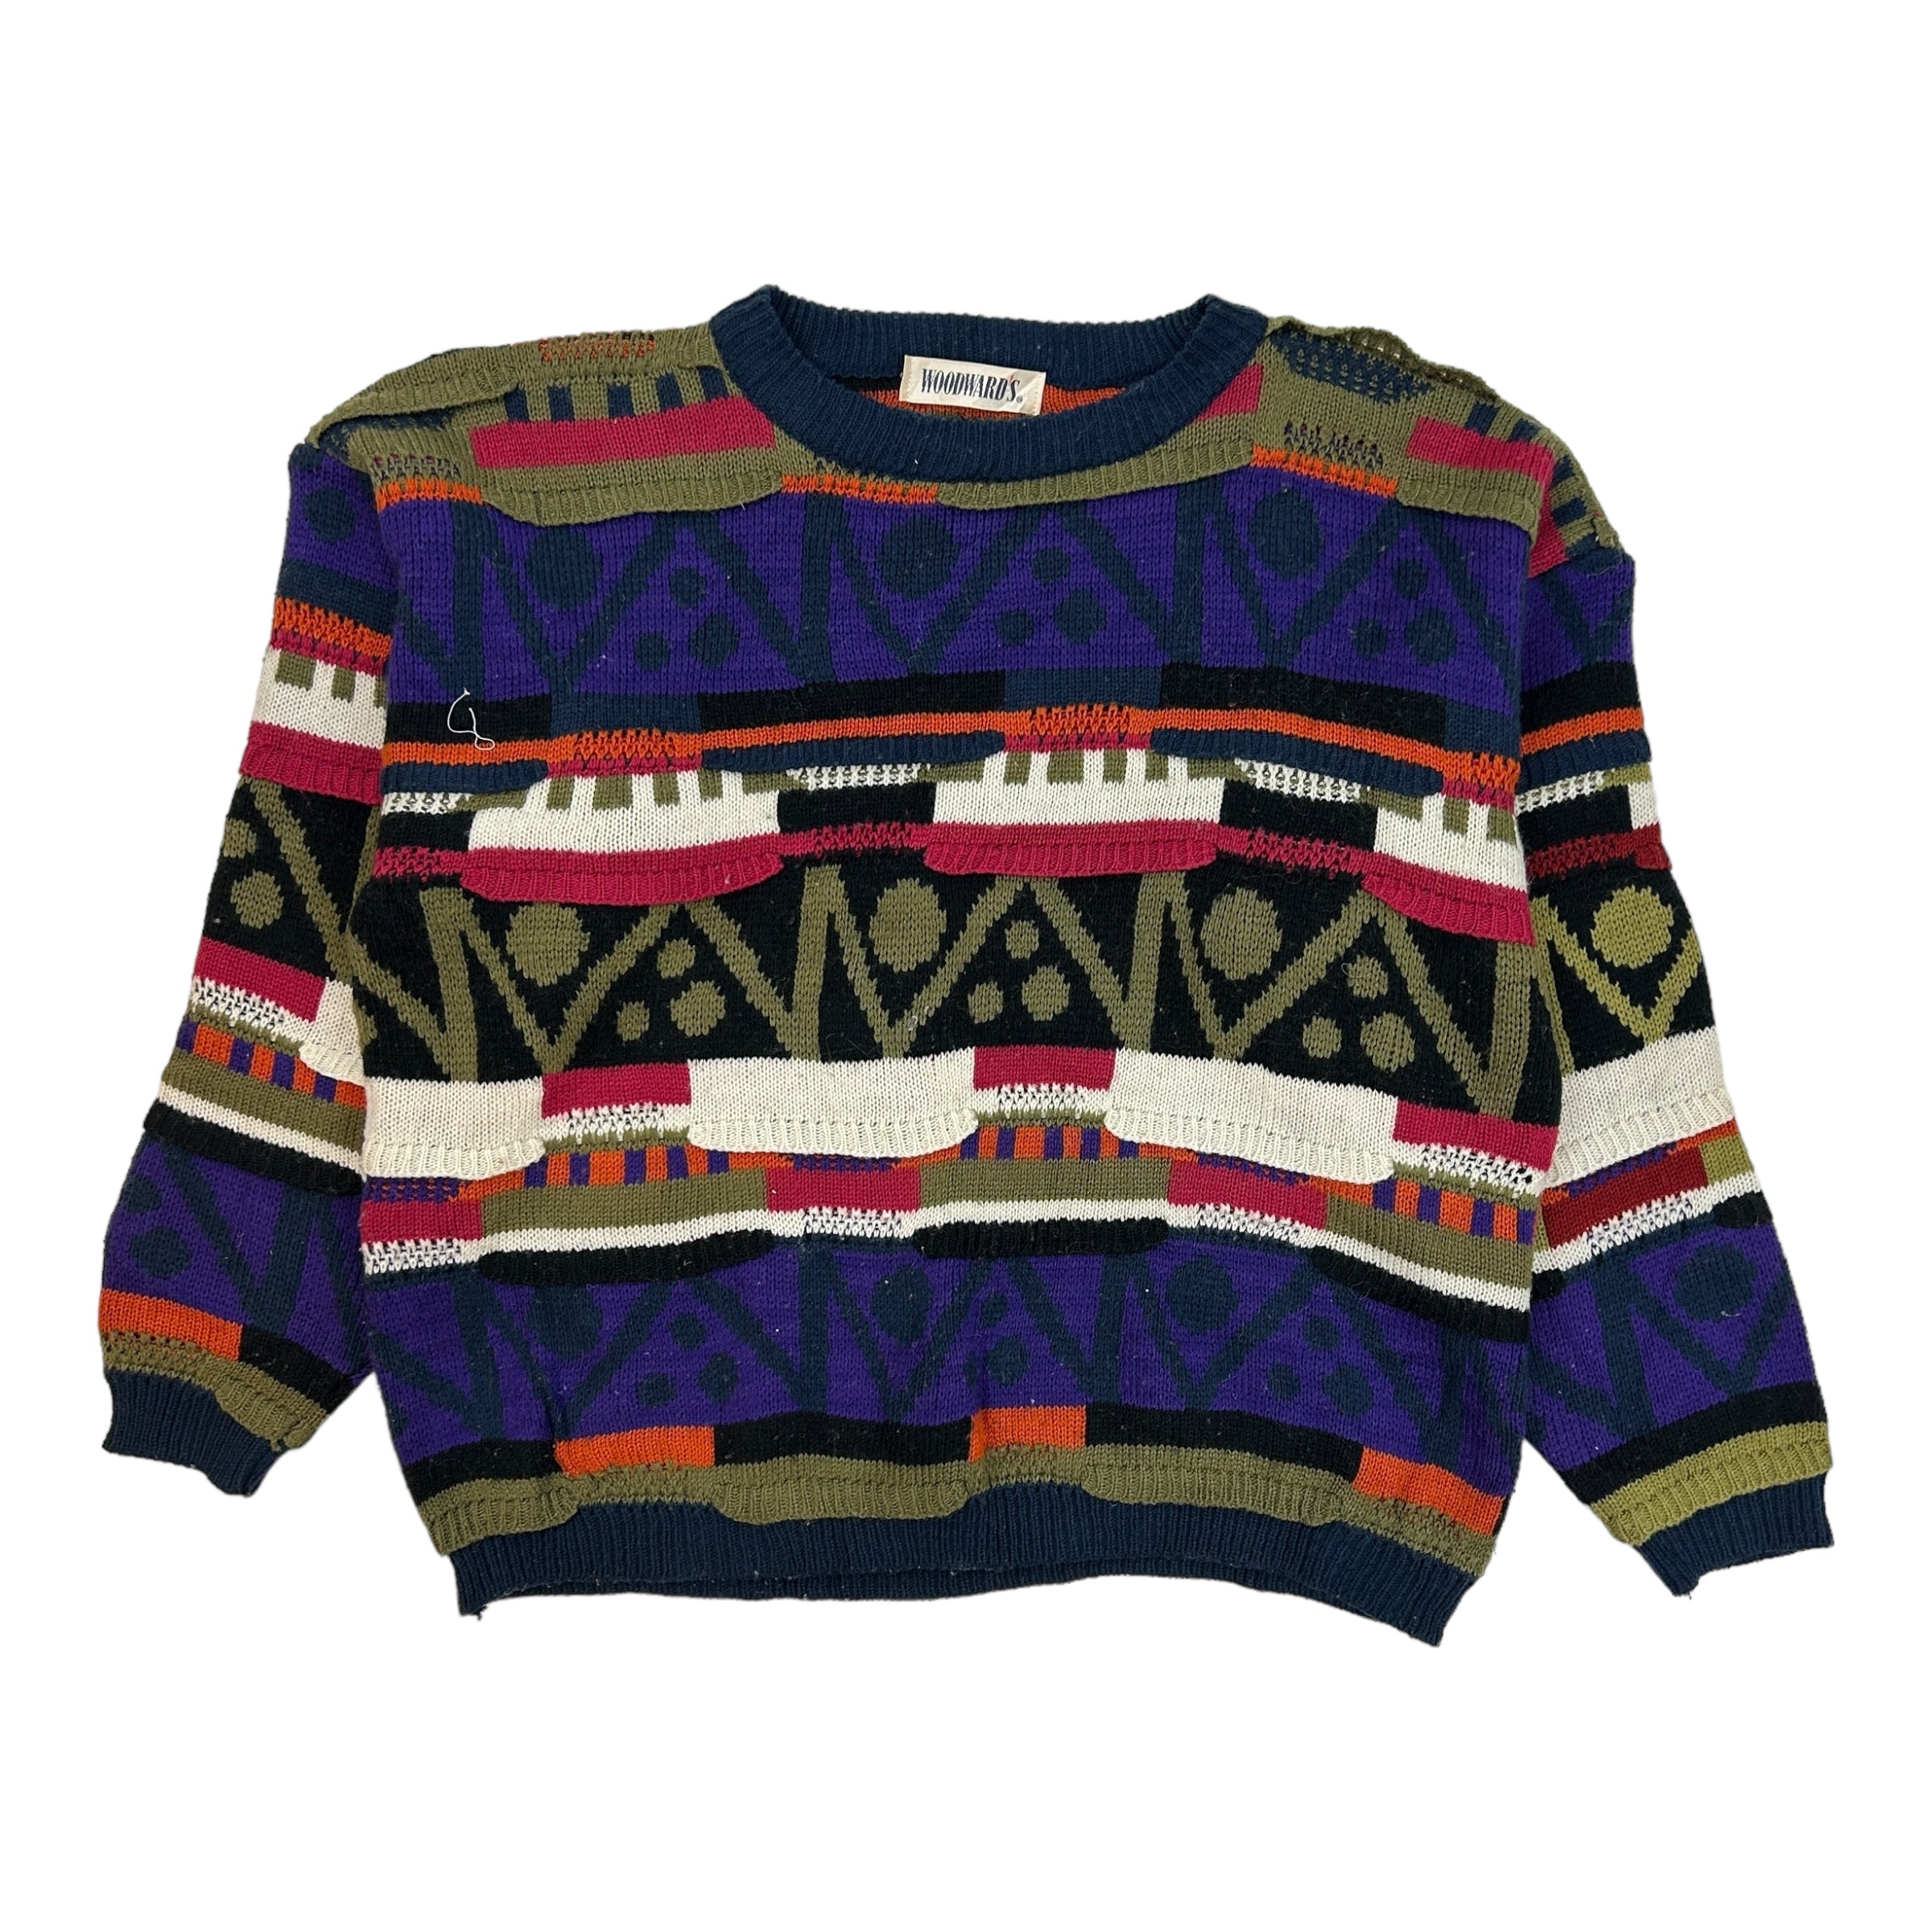 Vintage Woodward's Multicolor Knit Sweater